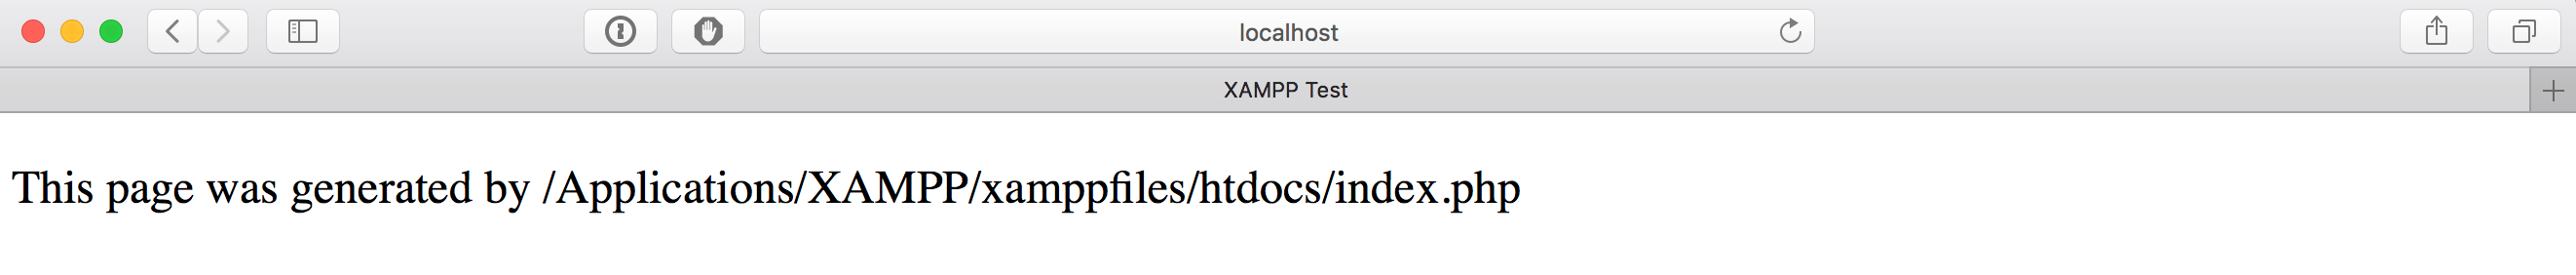 Test page for localhost with DocumentRoot set to /Applications/XAMPP/xamppfiles/htdocs